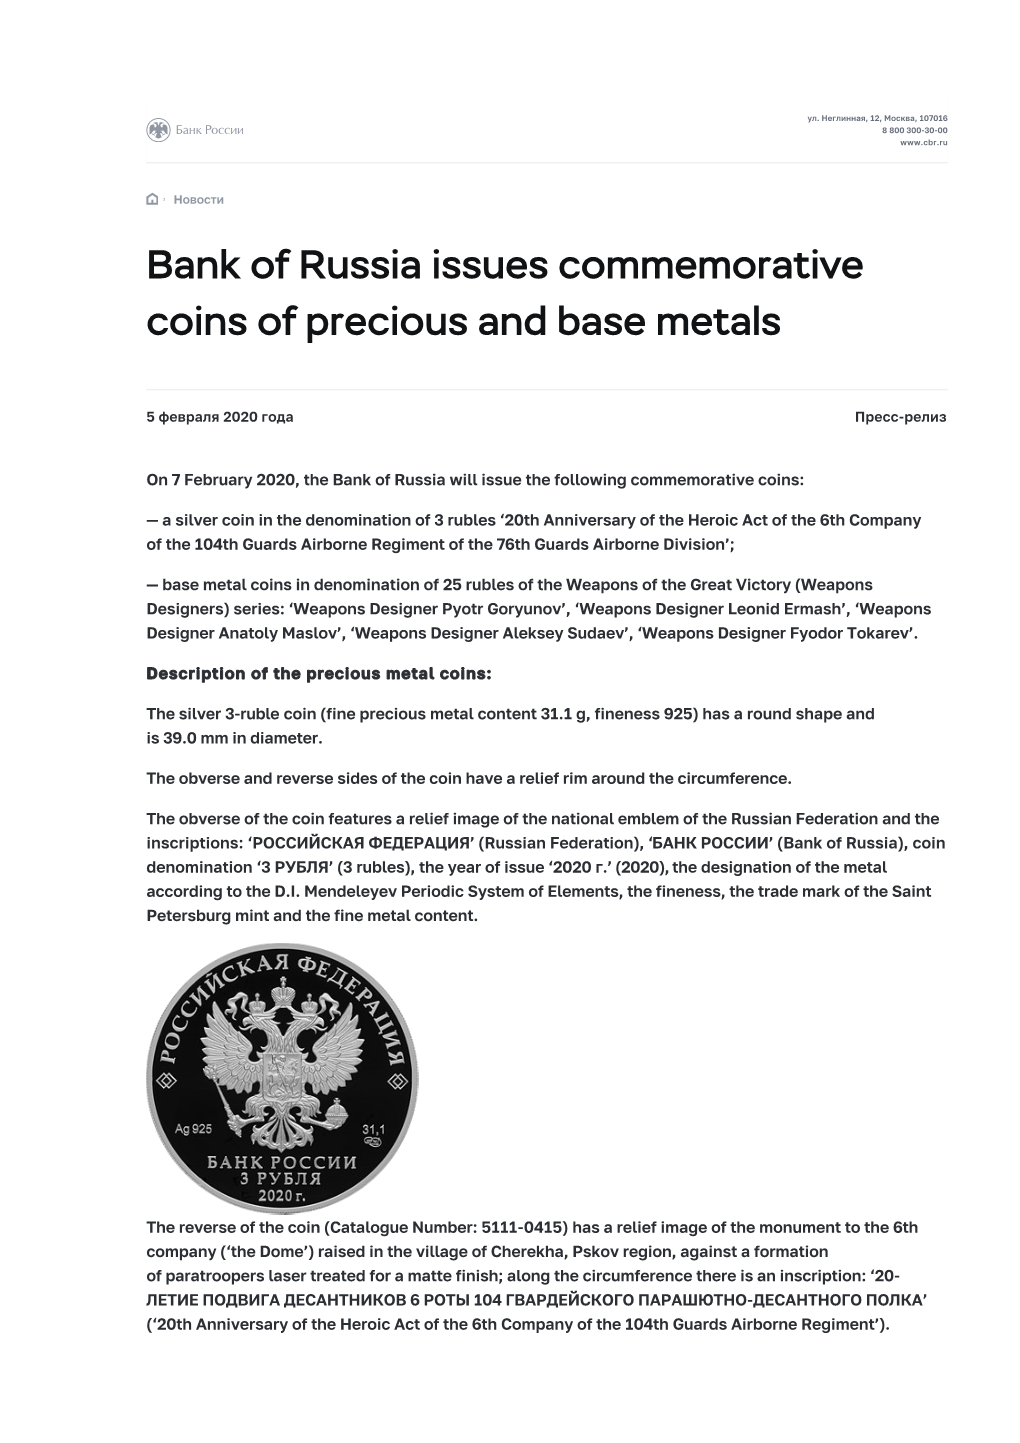 Bank of Russia Issues Commemorative Coins of Precious and Base Metals